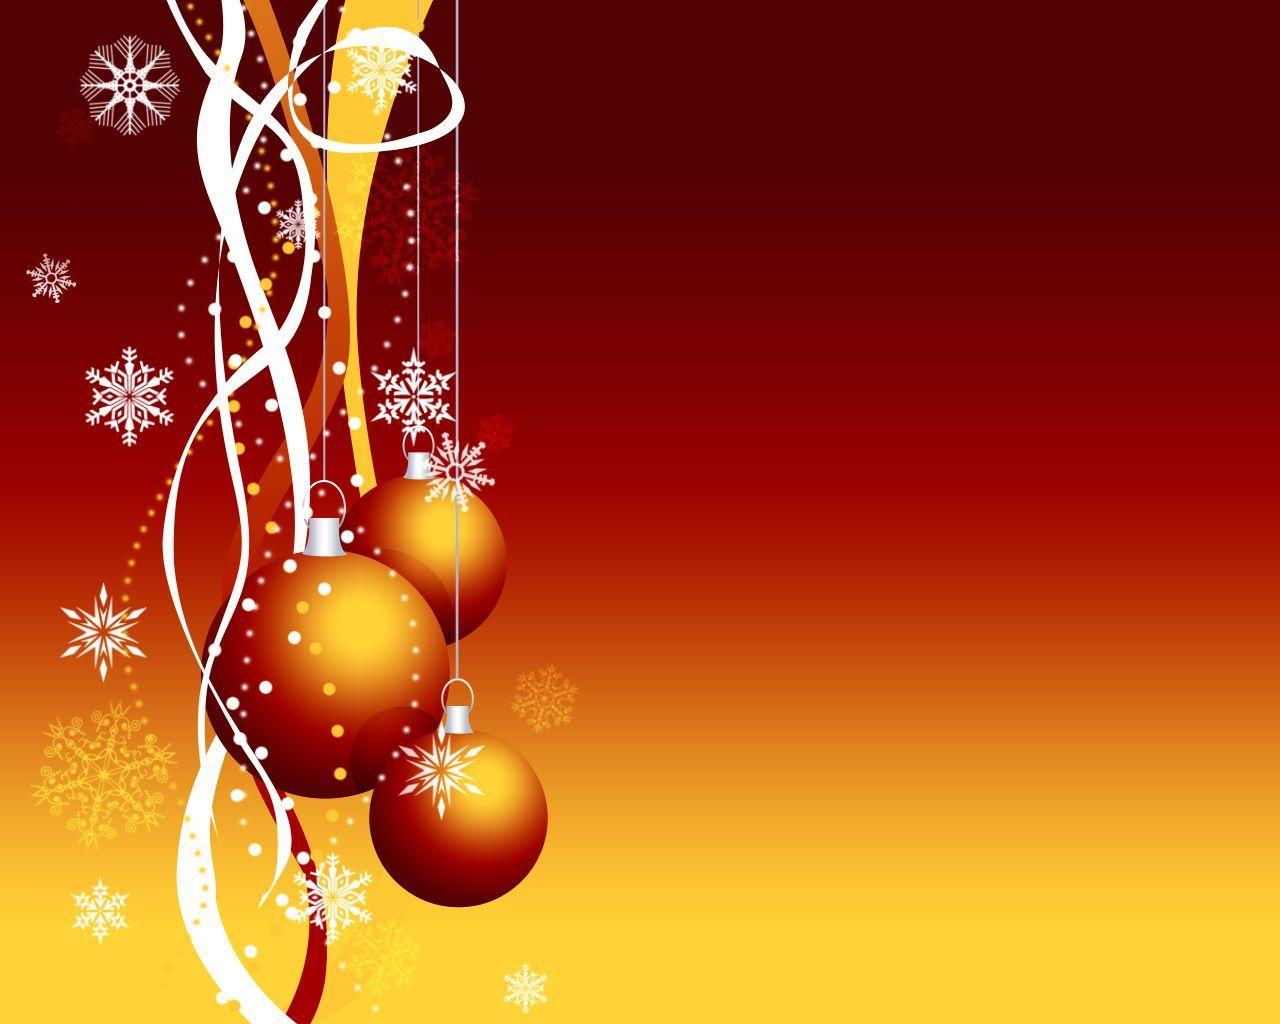 red ornament holiday powerpoint background